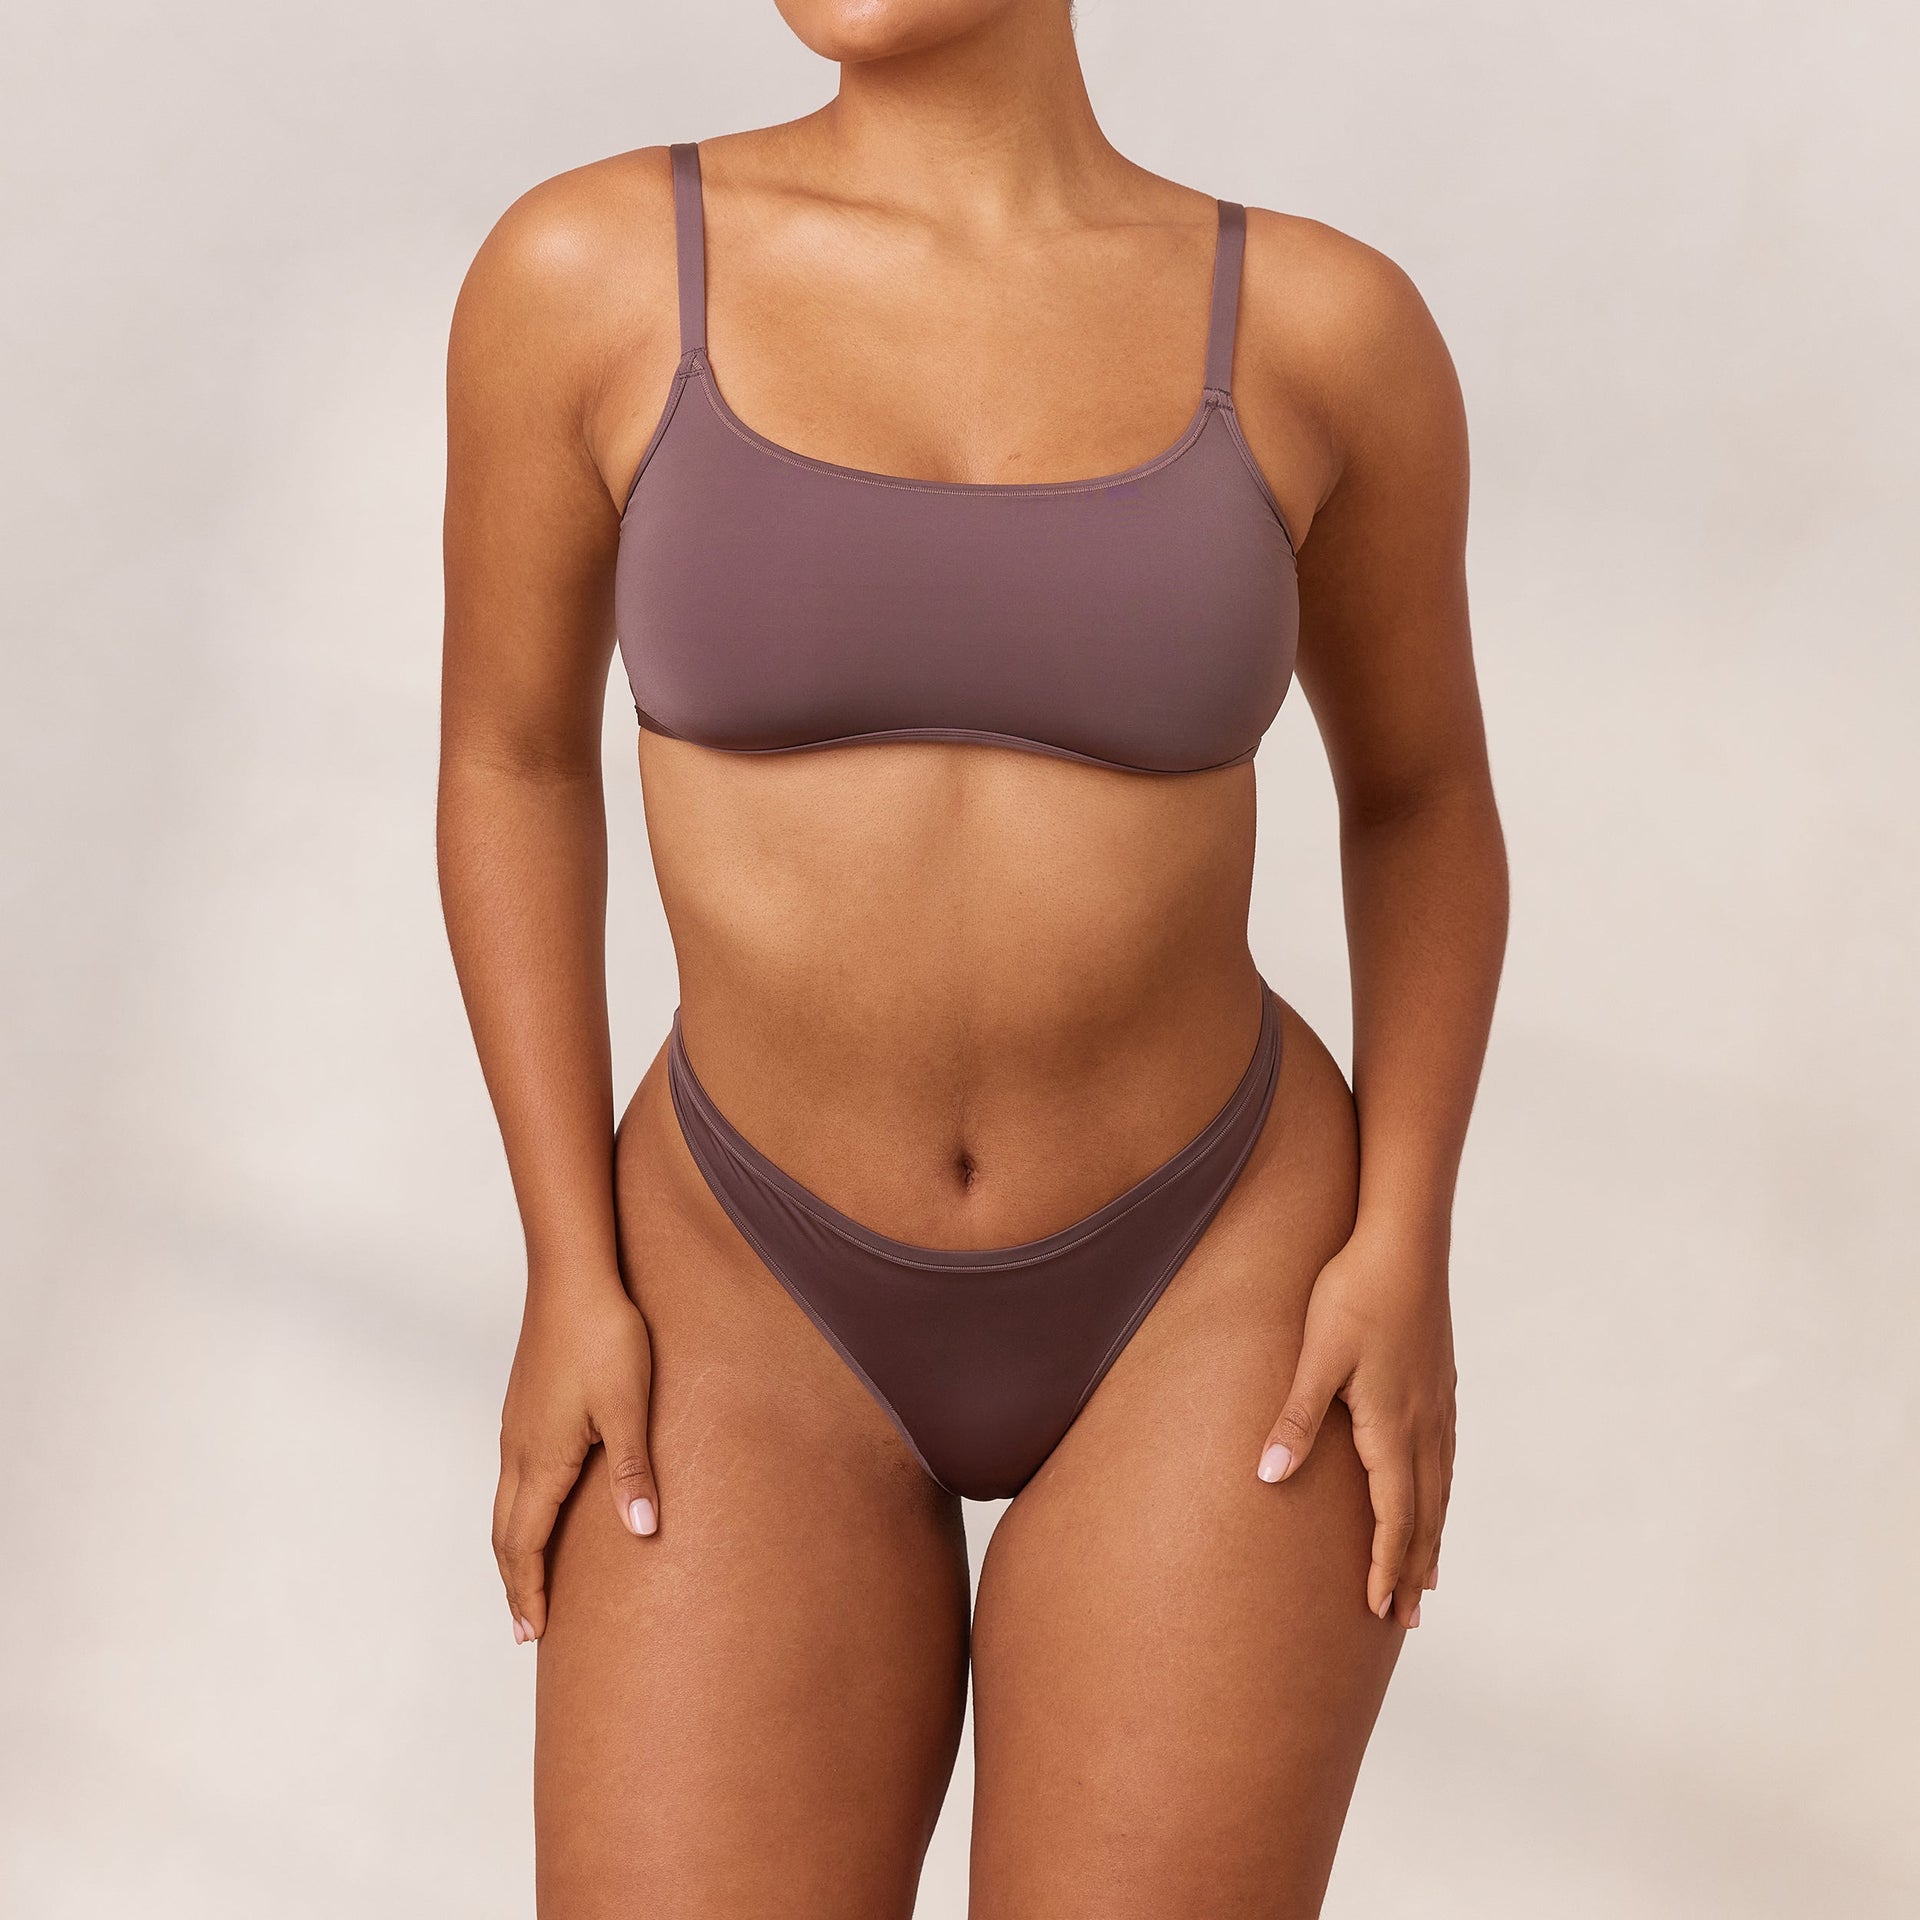 Barely There Plunge Bra - Damson